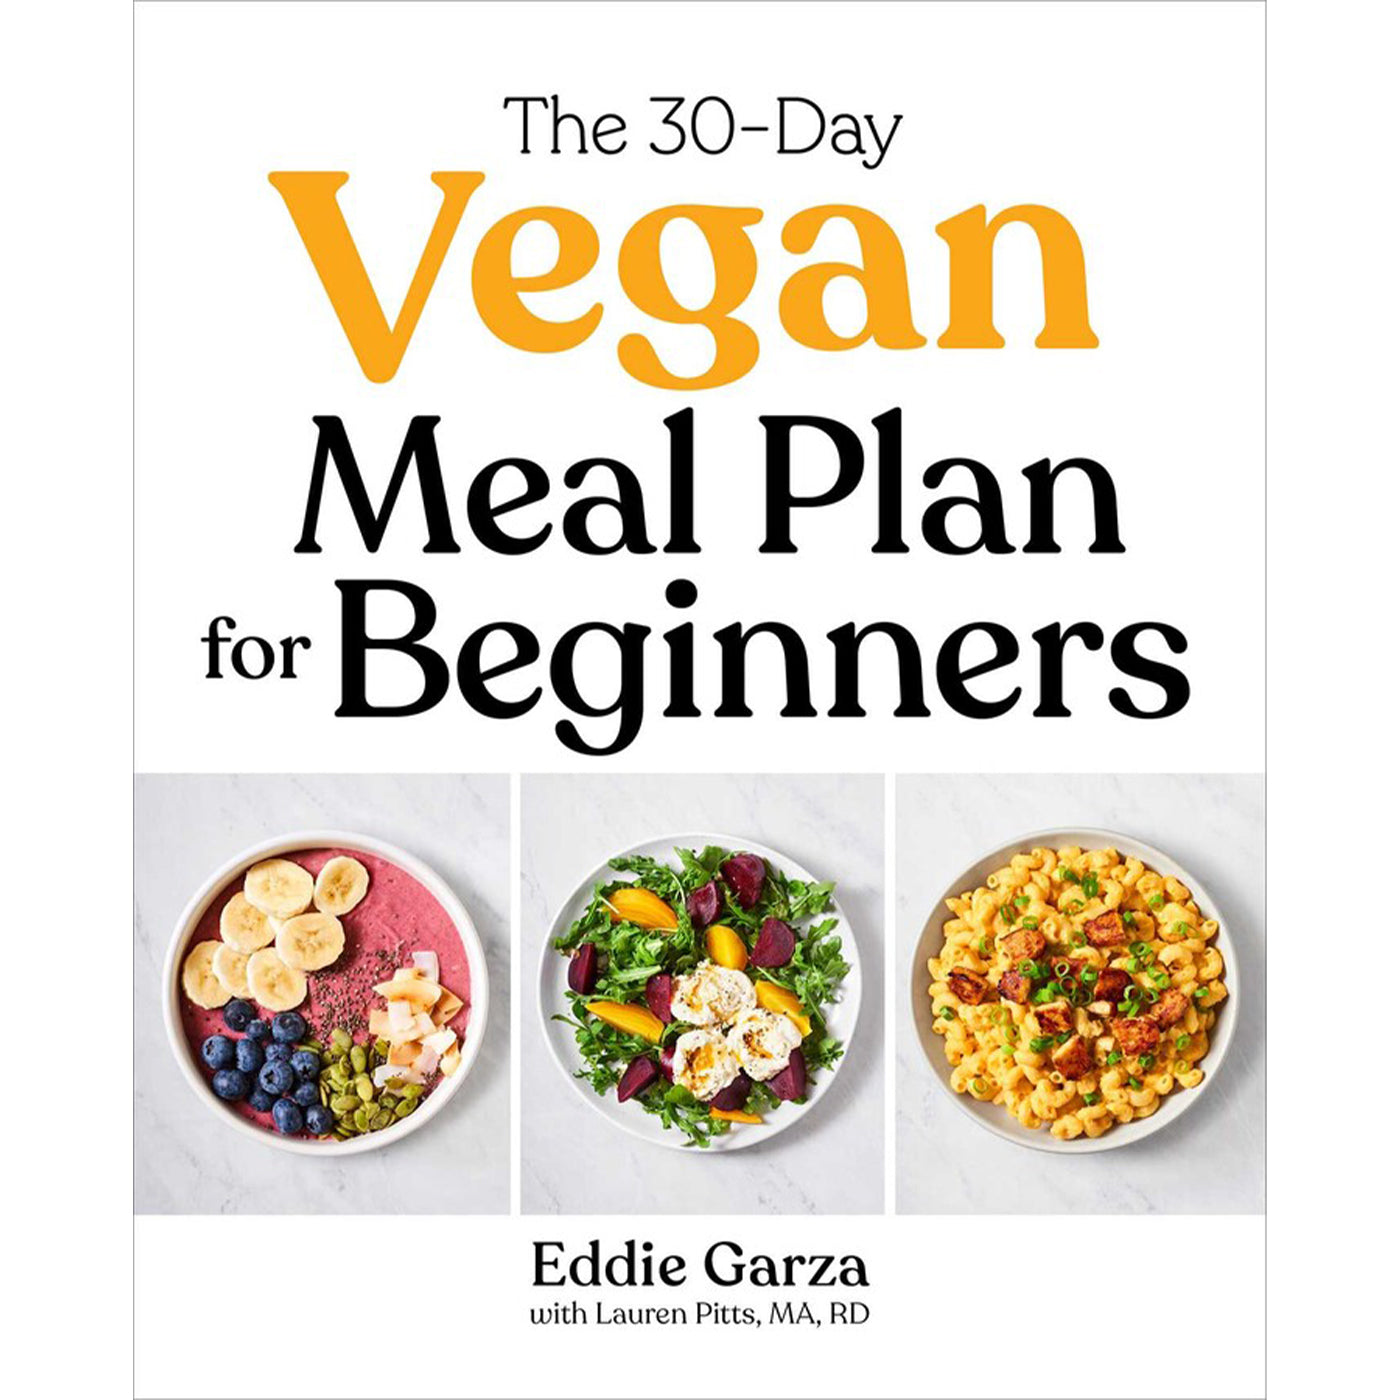 The 30-Day Vegan Meal Plan for Beginners